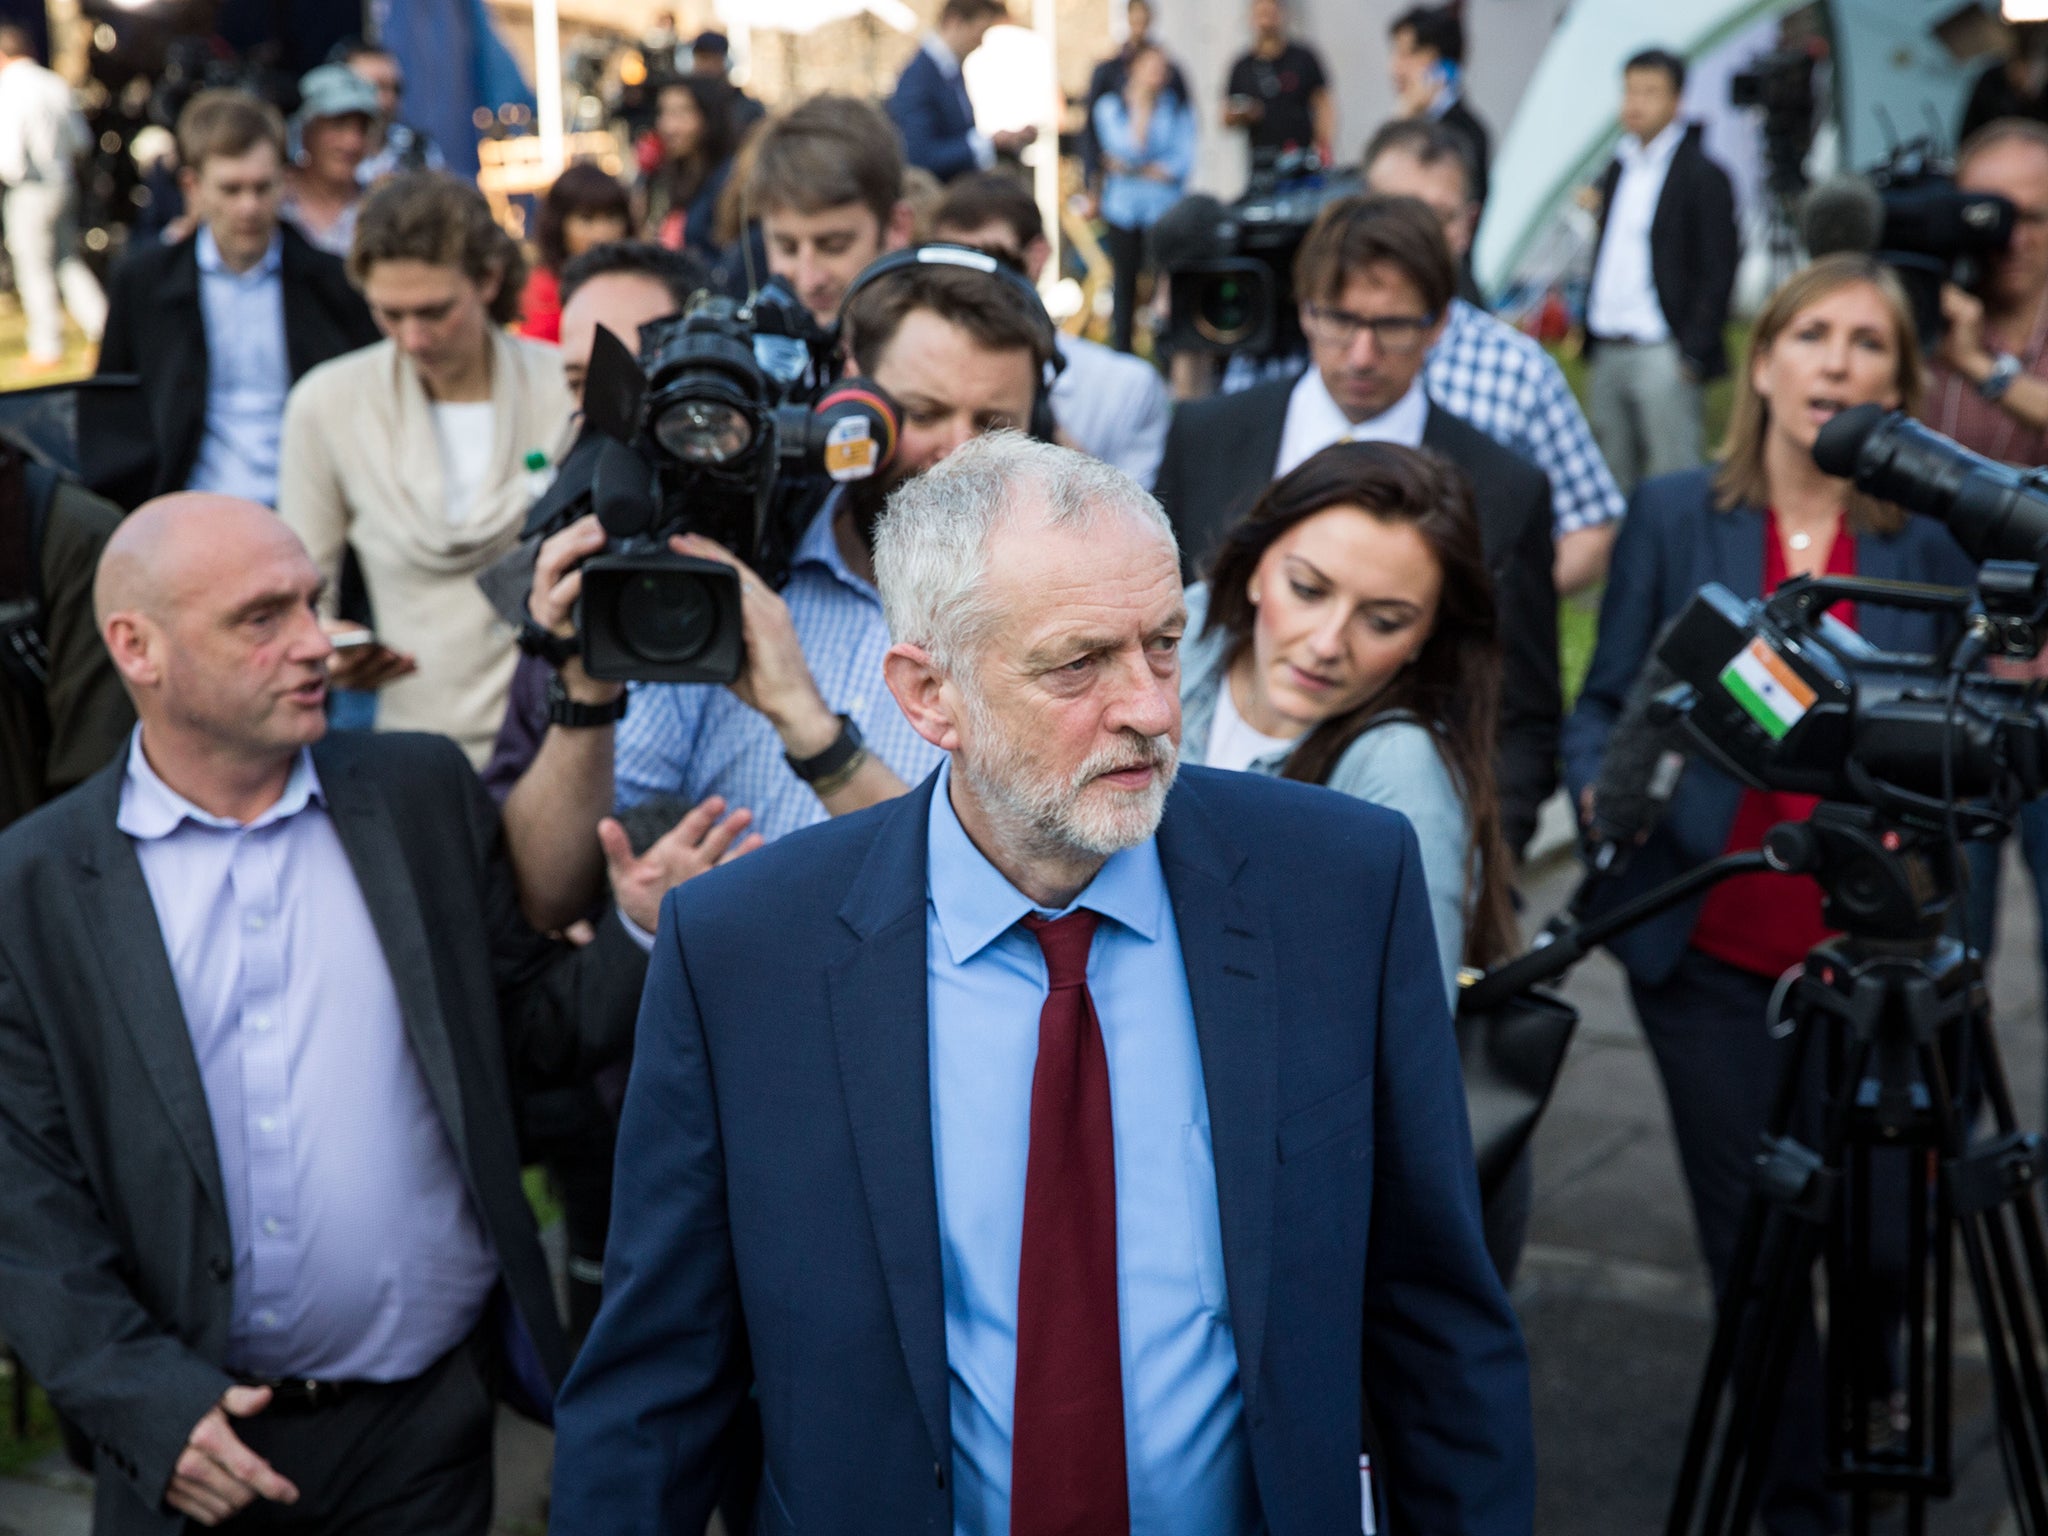 Jeremy Corbyn has faced calls to resign after his lacklustre performance in the EU referendum camp is blamed for overwhelming Leave vote in Labour heartlands